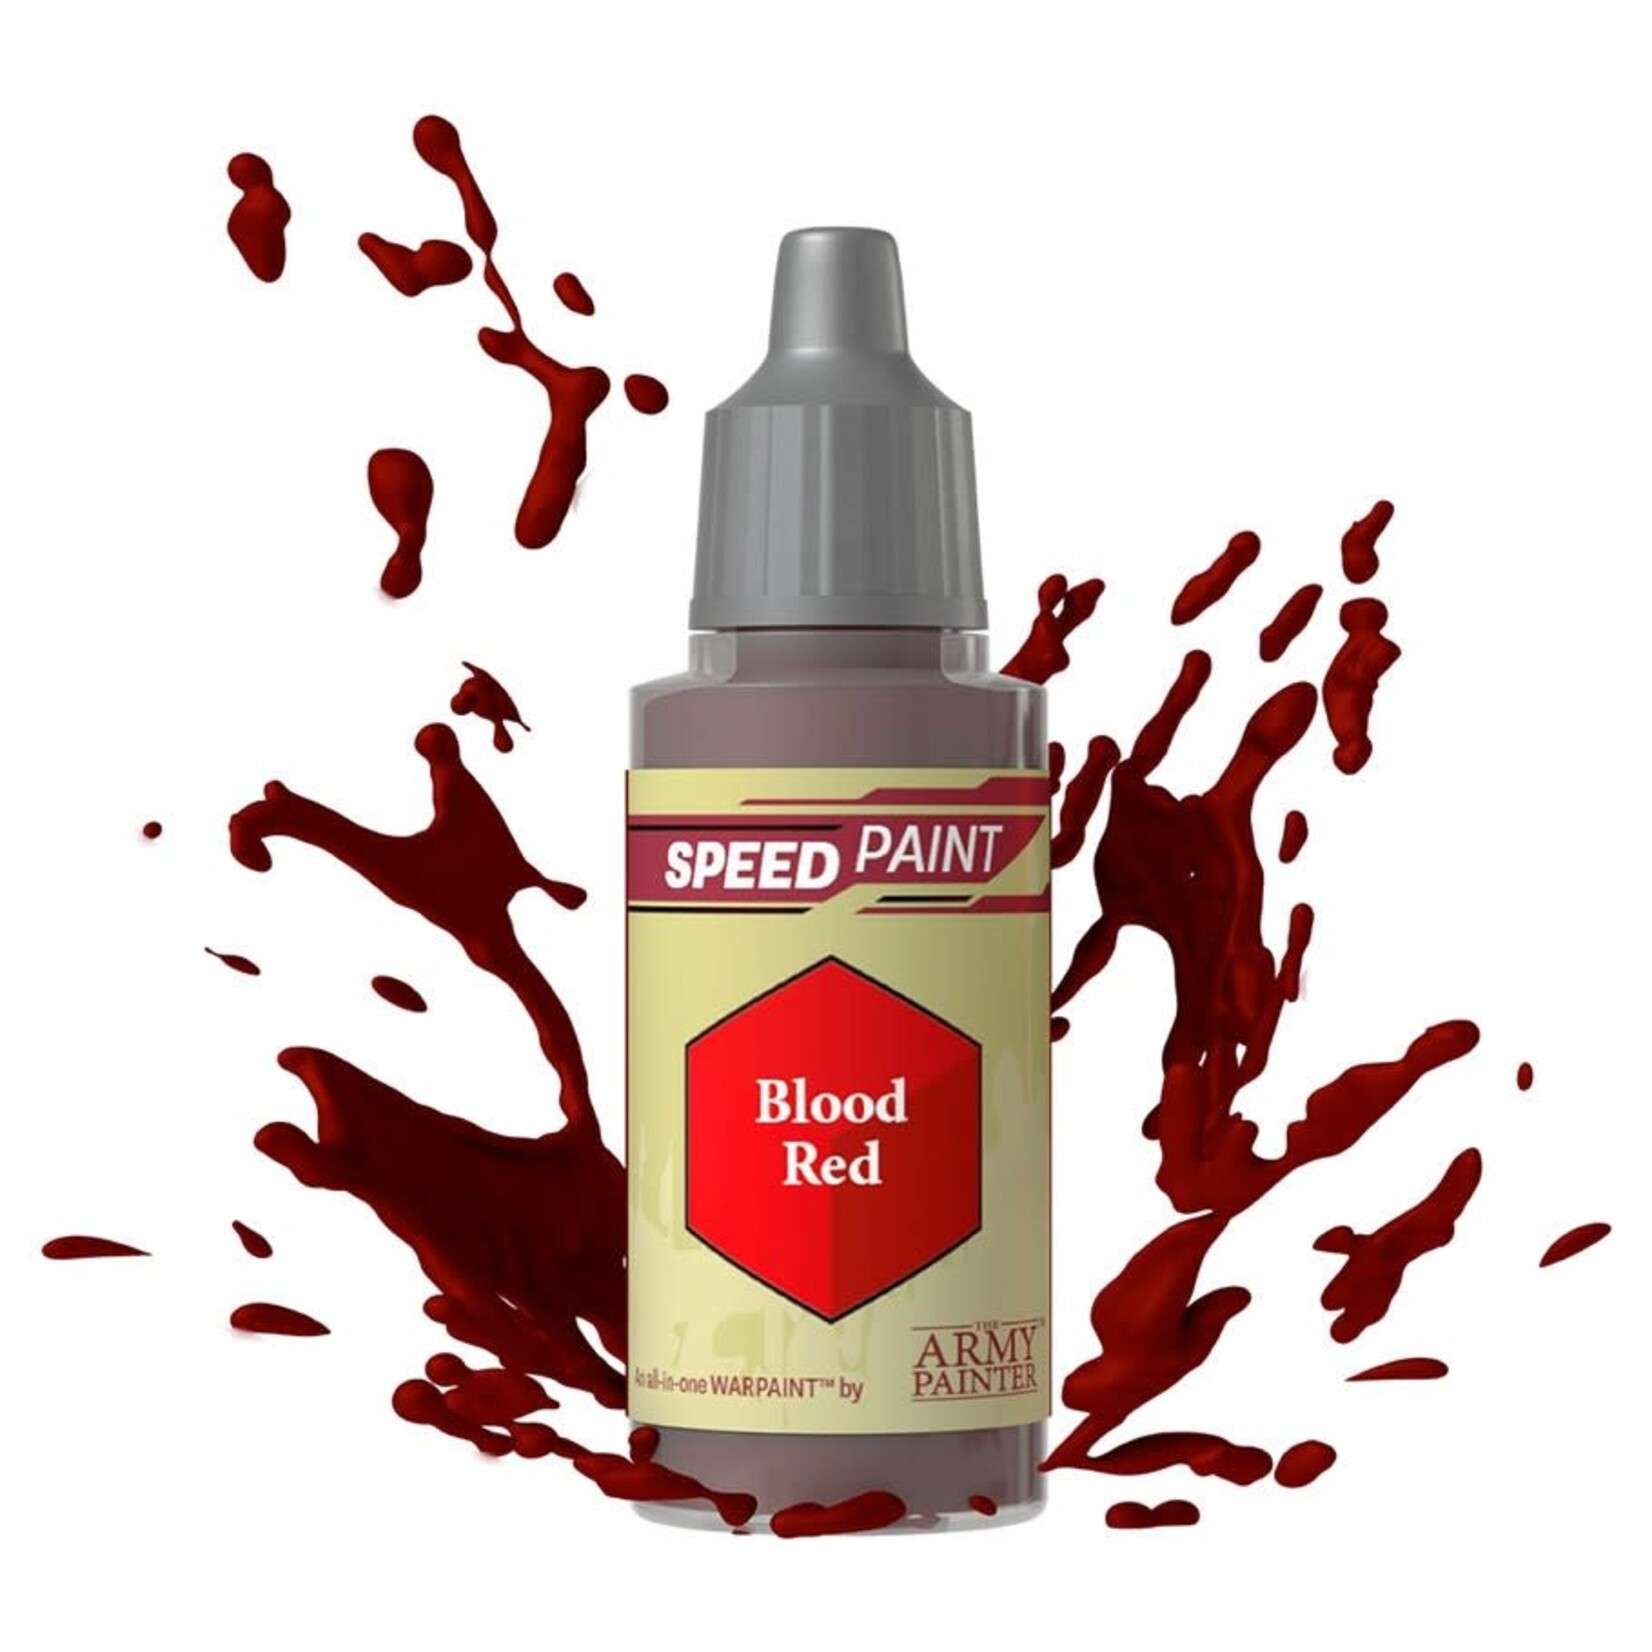 The Army Painter Speedpaint: Blood Red 18ml